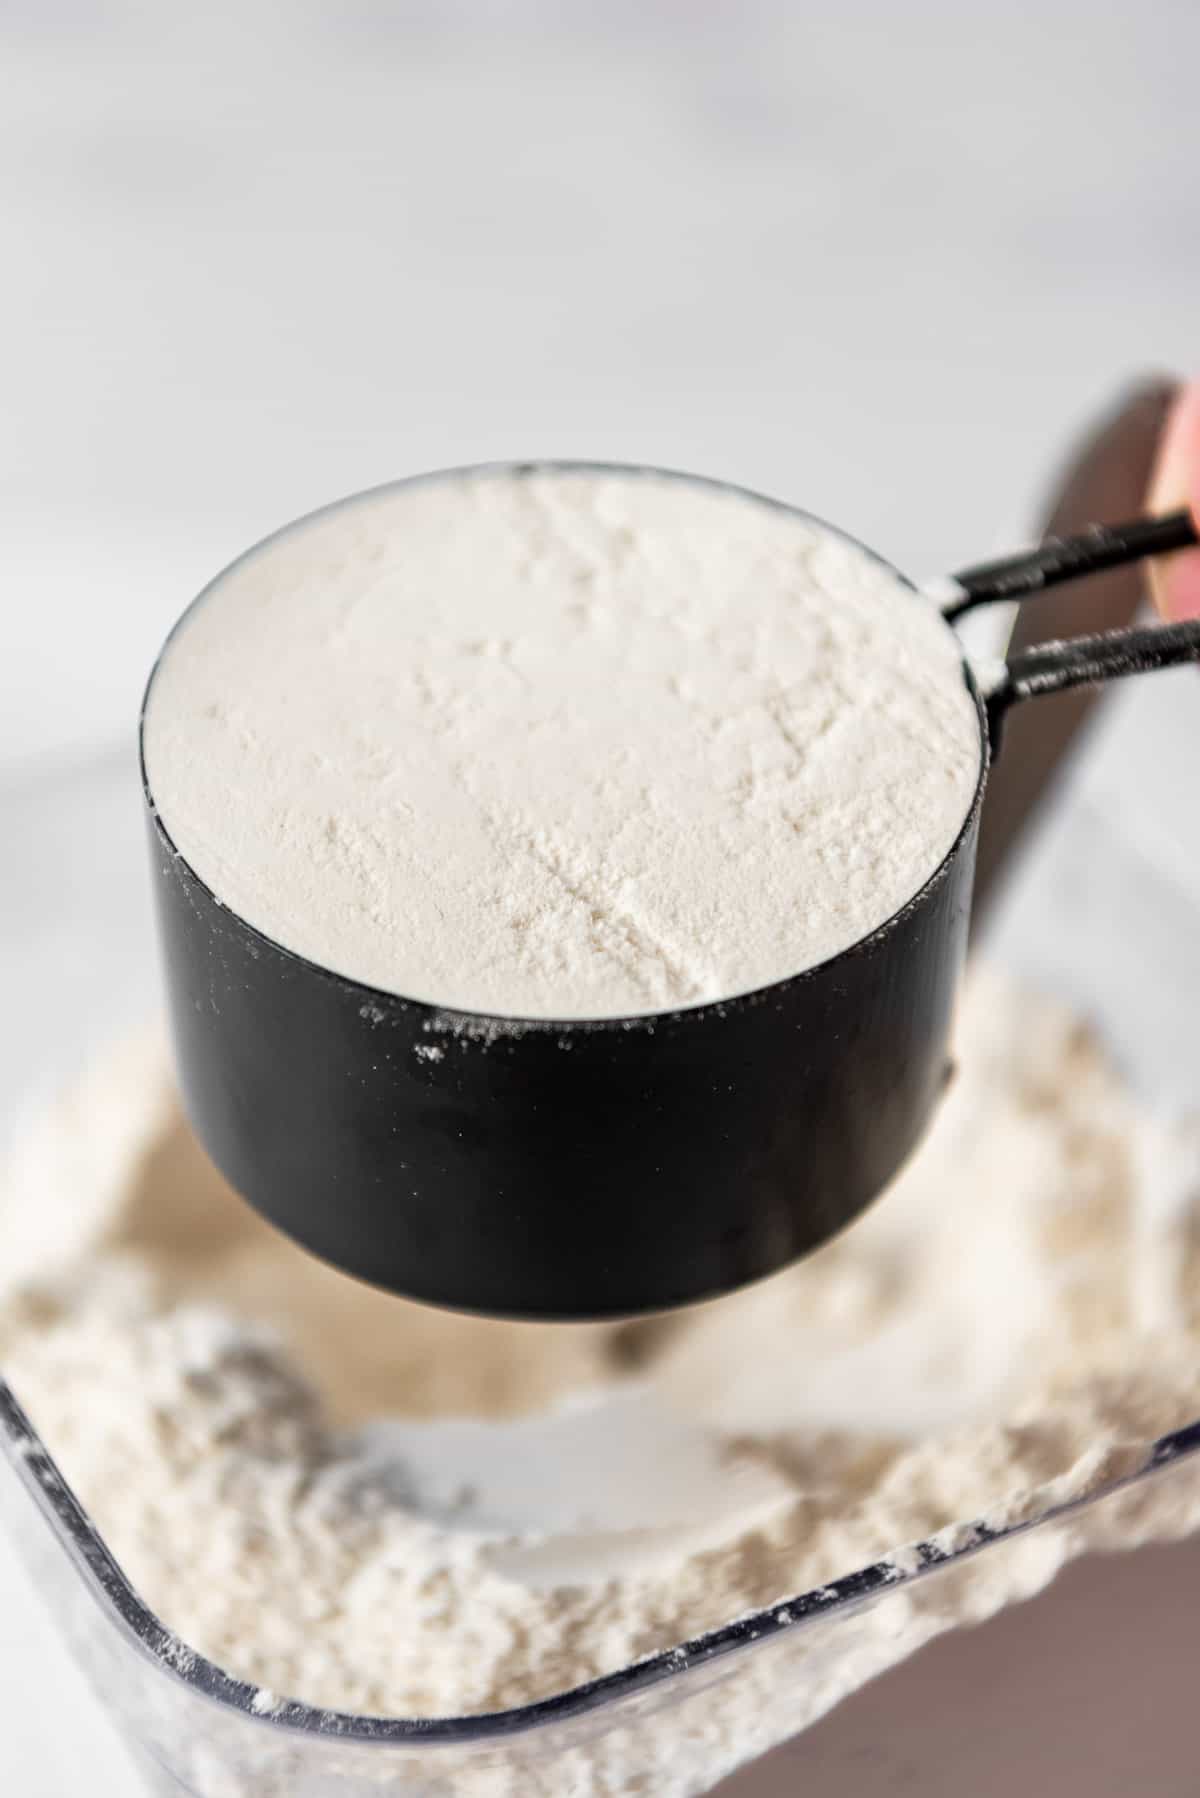 A measuring cup filled with flour and leveled off.